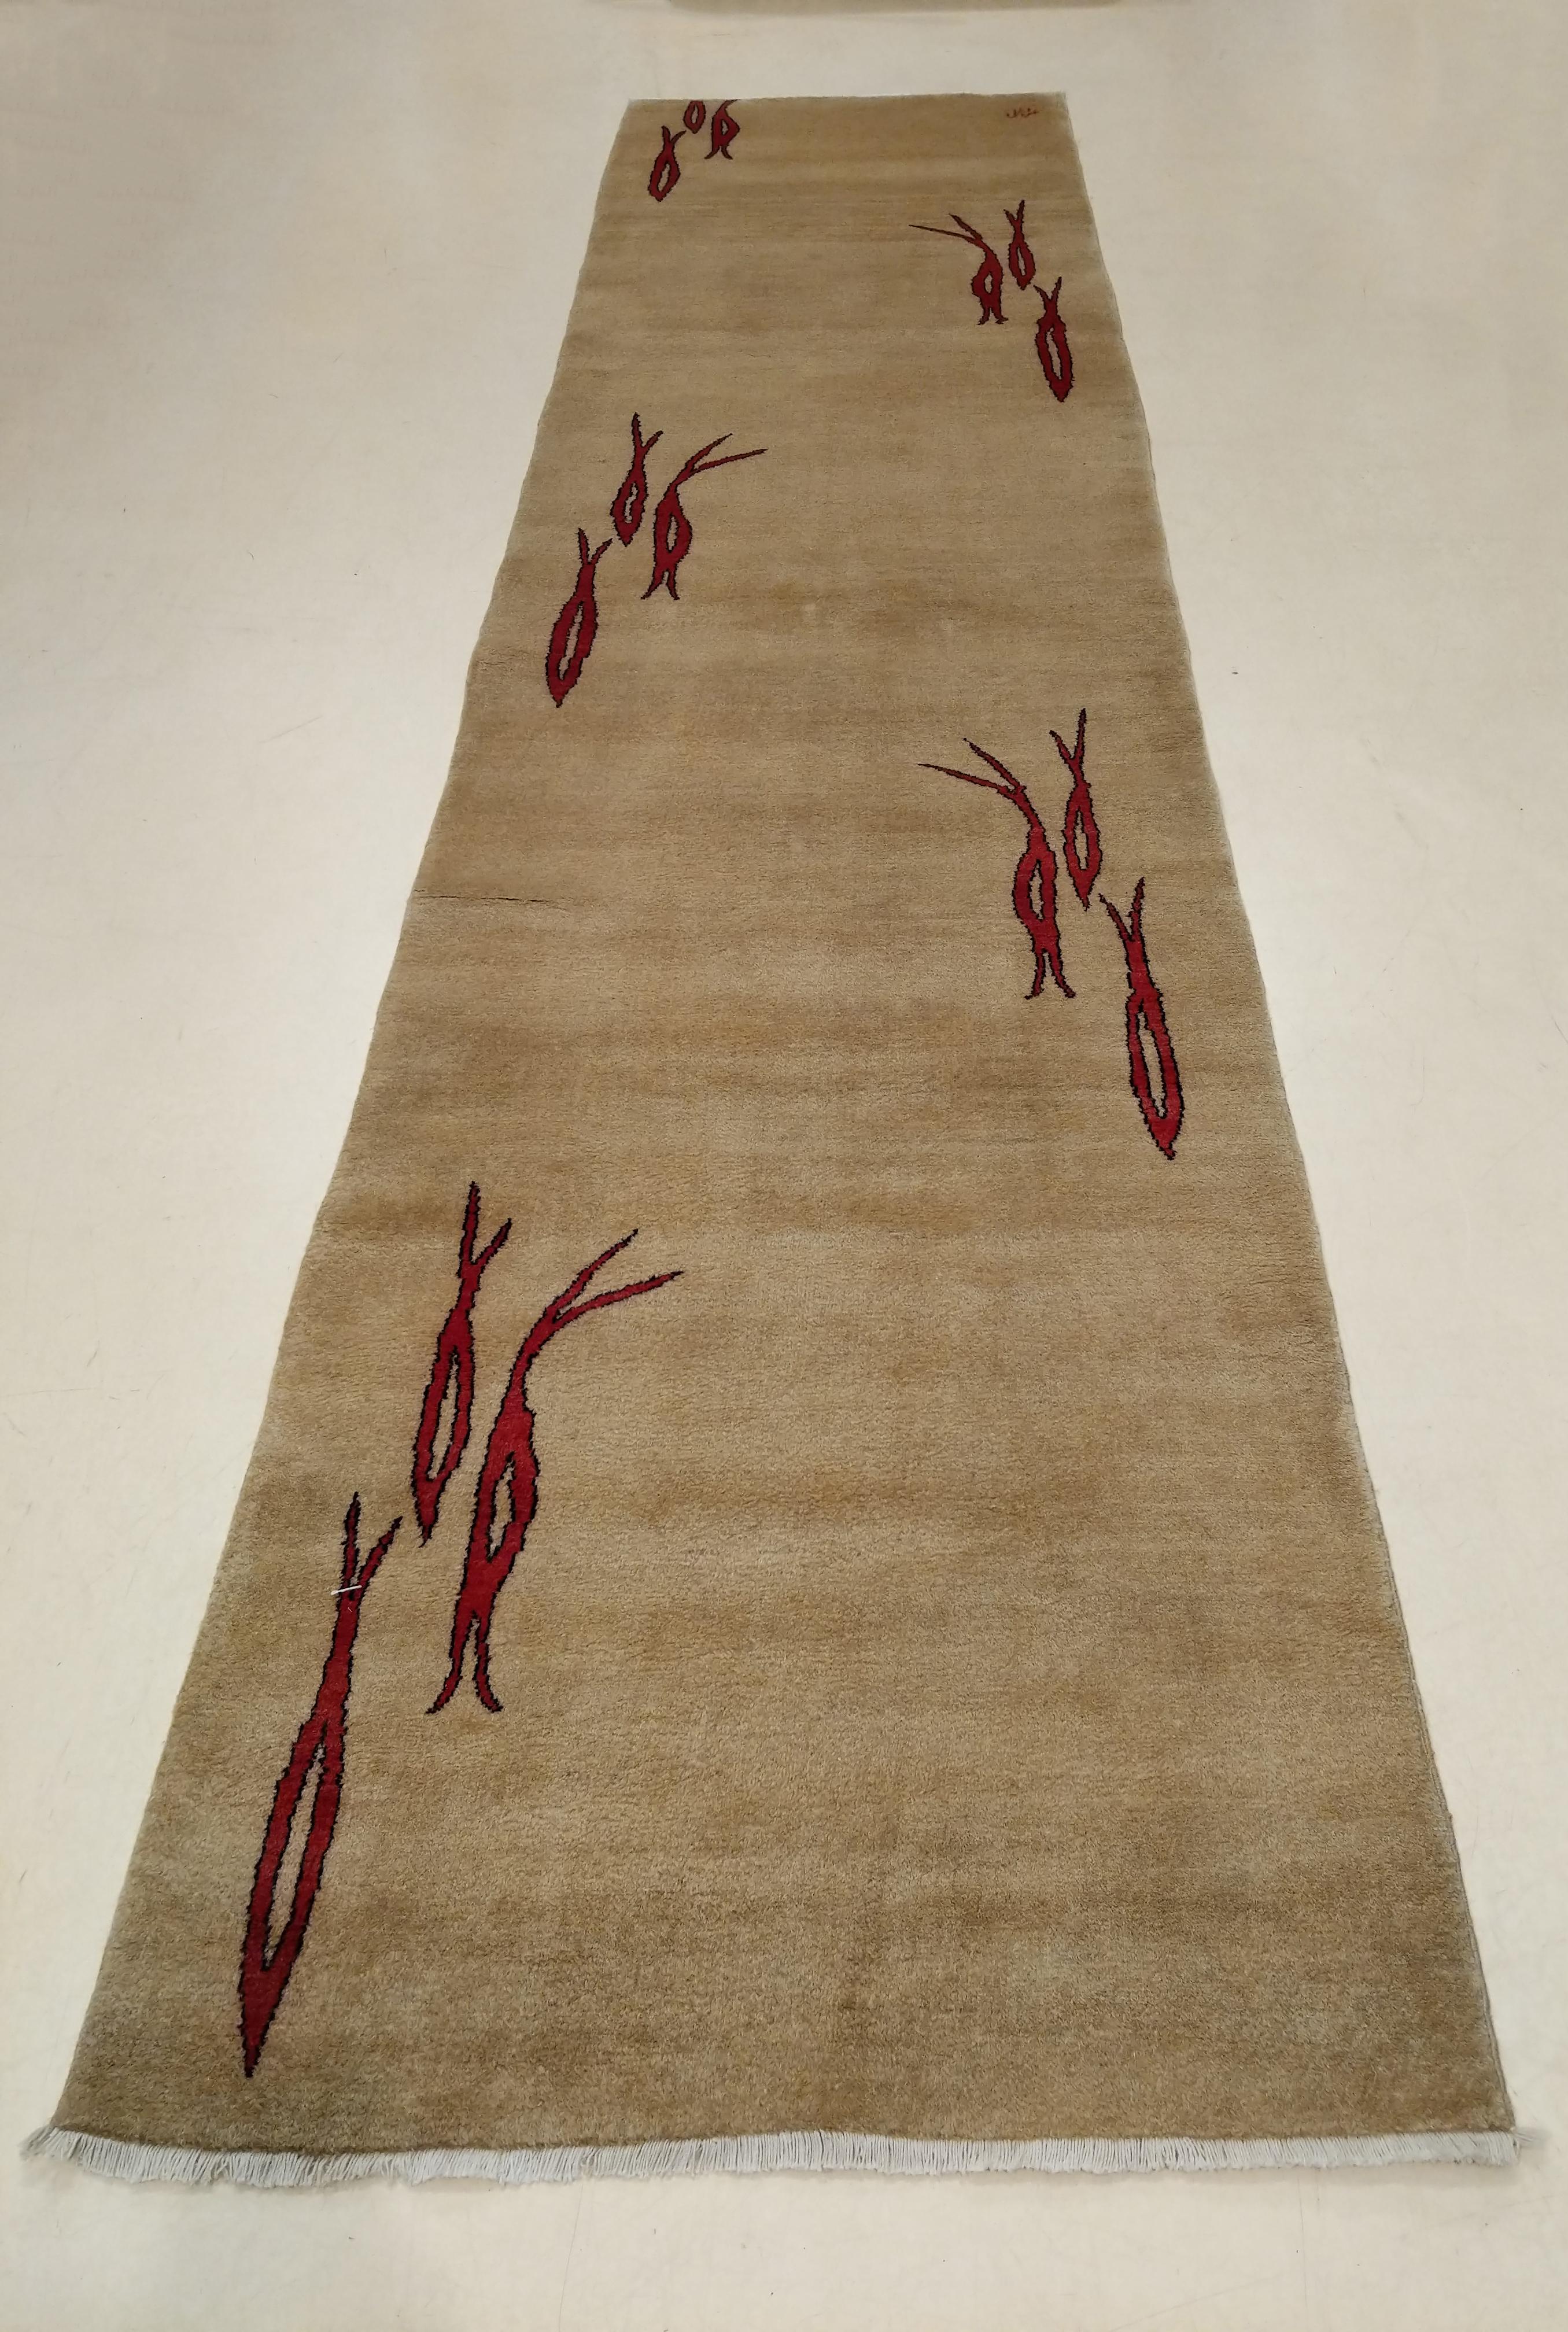 A rare and unique modernist oriental rug, distinguished by an ivory open field partially embellished by groups of three stylized fish in a rich burgundy red. The arrangement of these clusters of fish is strongly reminiscent of the design arrangement